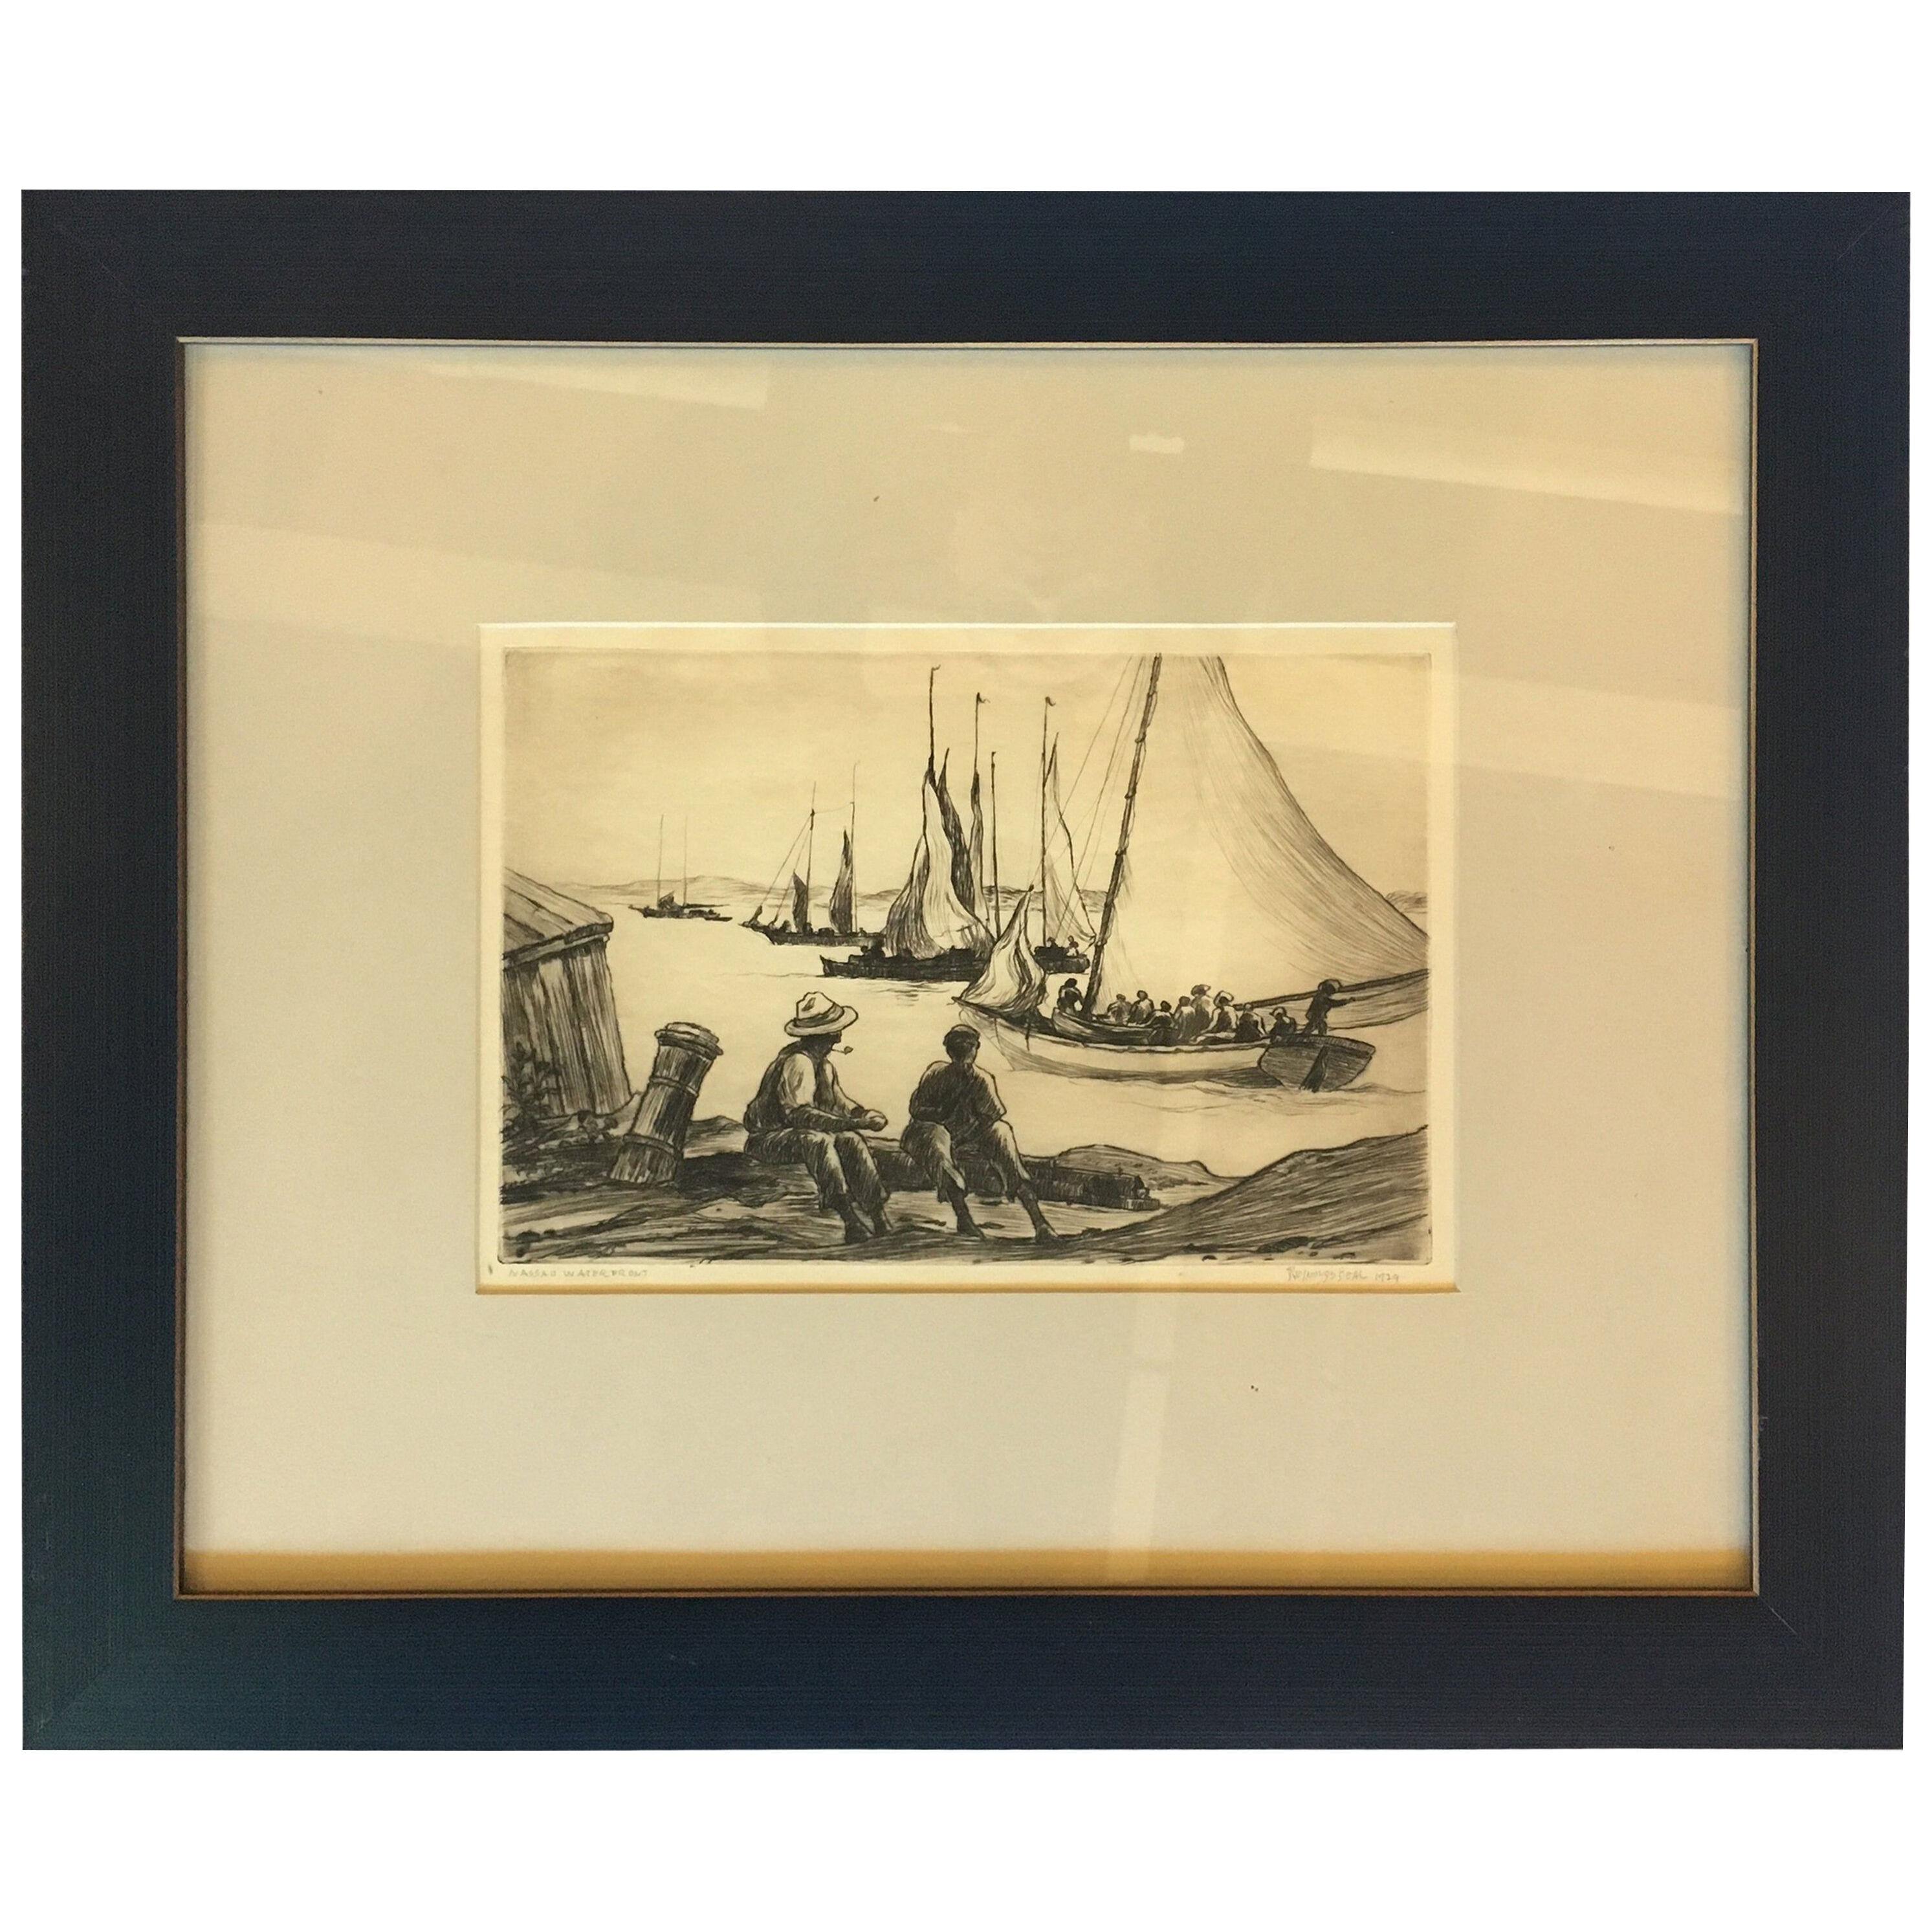 Reynolds Beal Drawing "Nassau Waterfront" Signed and Dated 1929